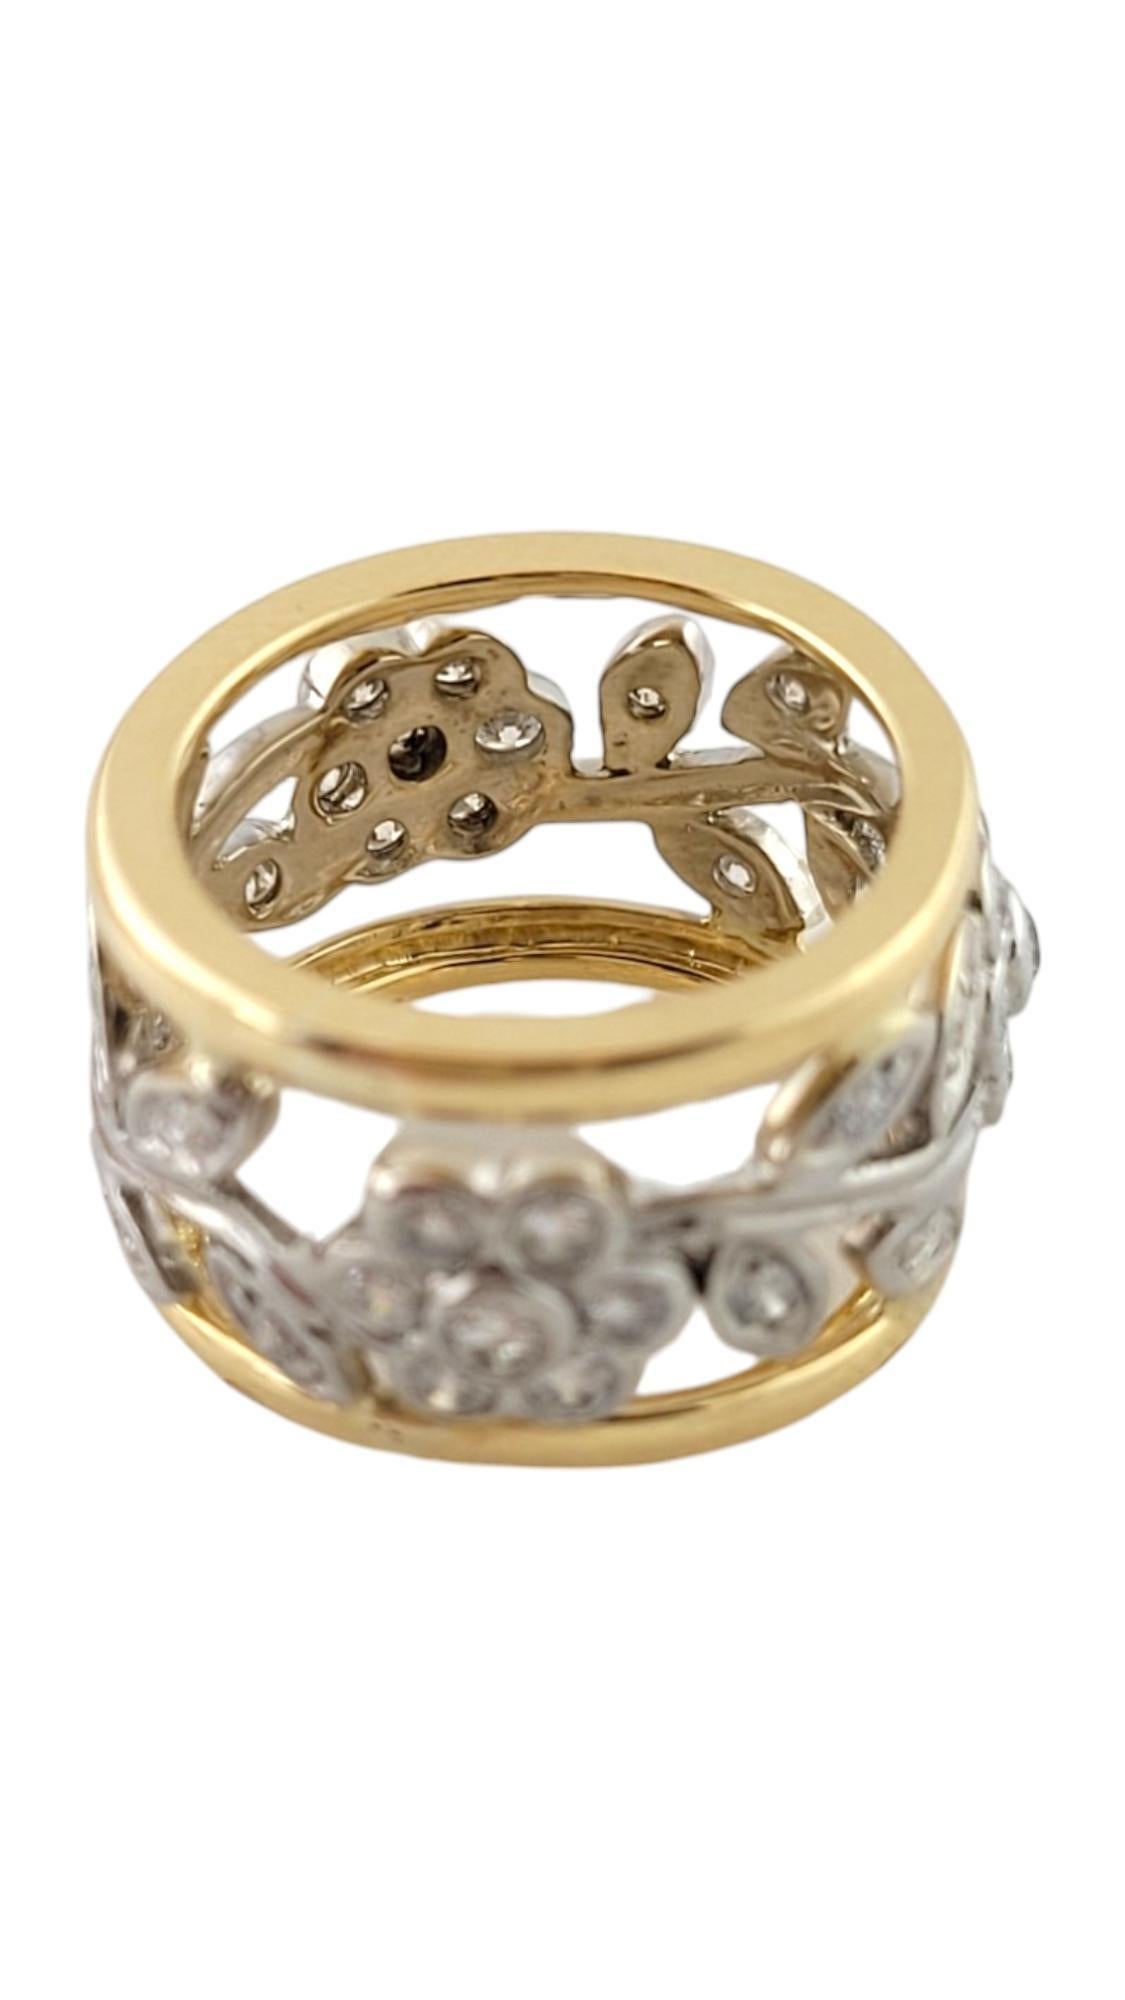 Brilliant Cut 14K Yellow and White Gold Diamond Floral Ring Size 3.5 #16292 For Sale